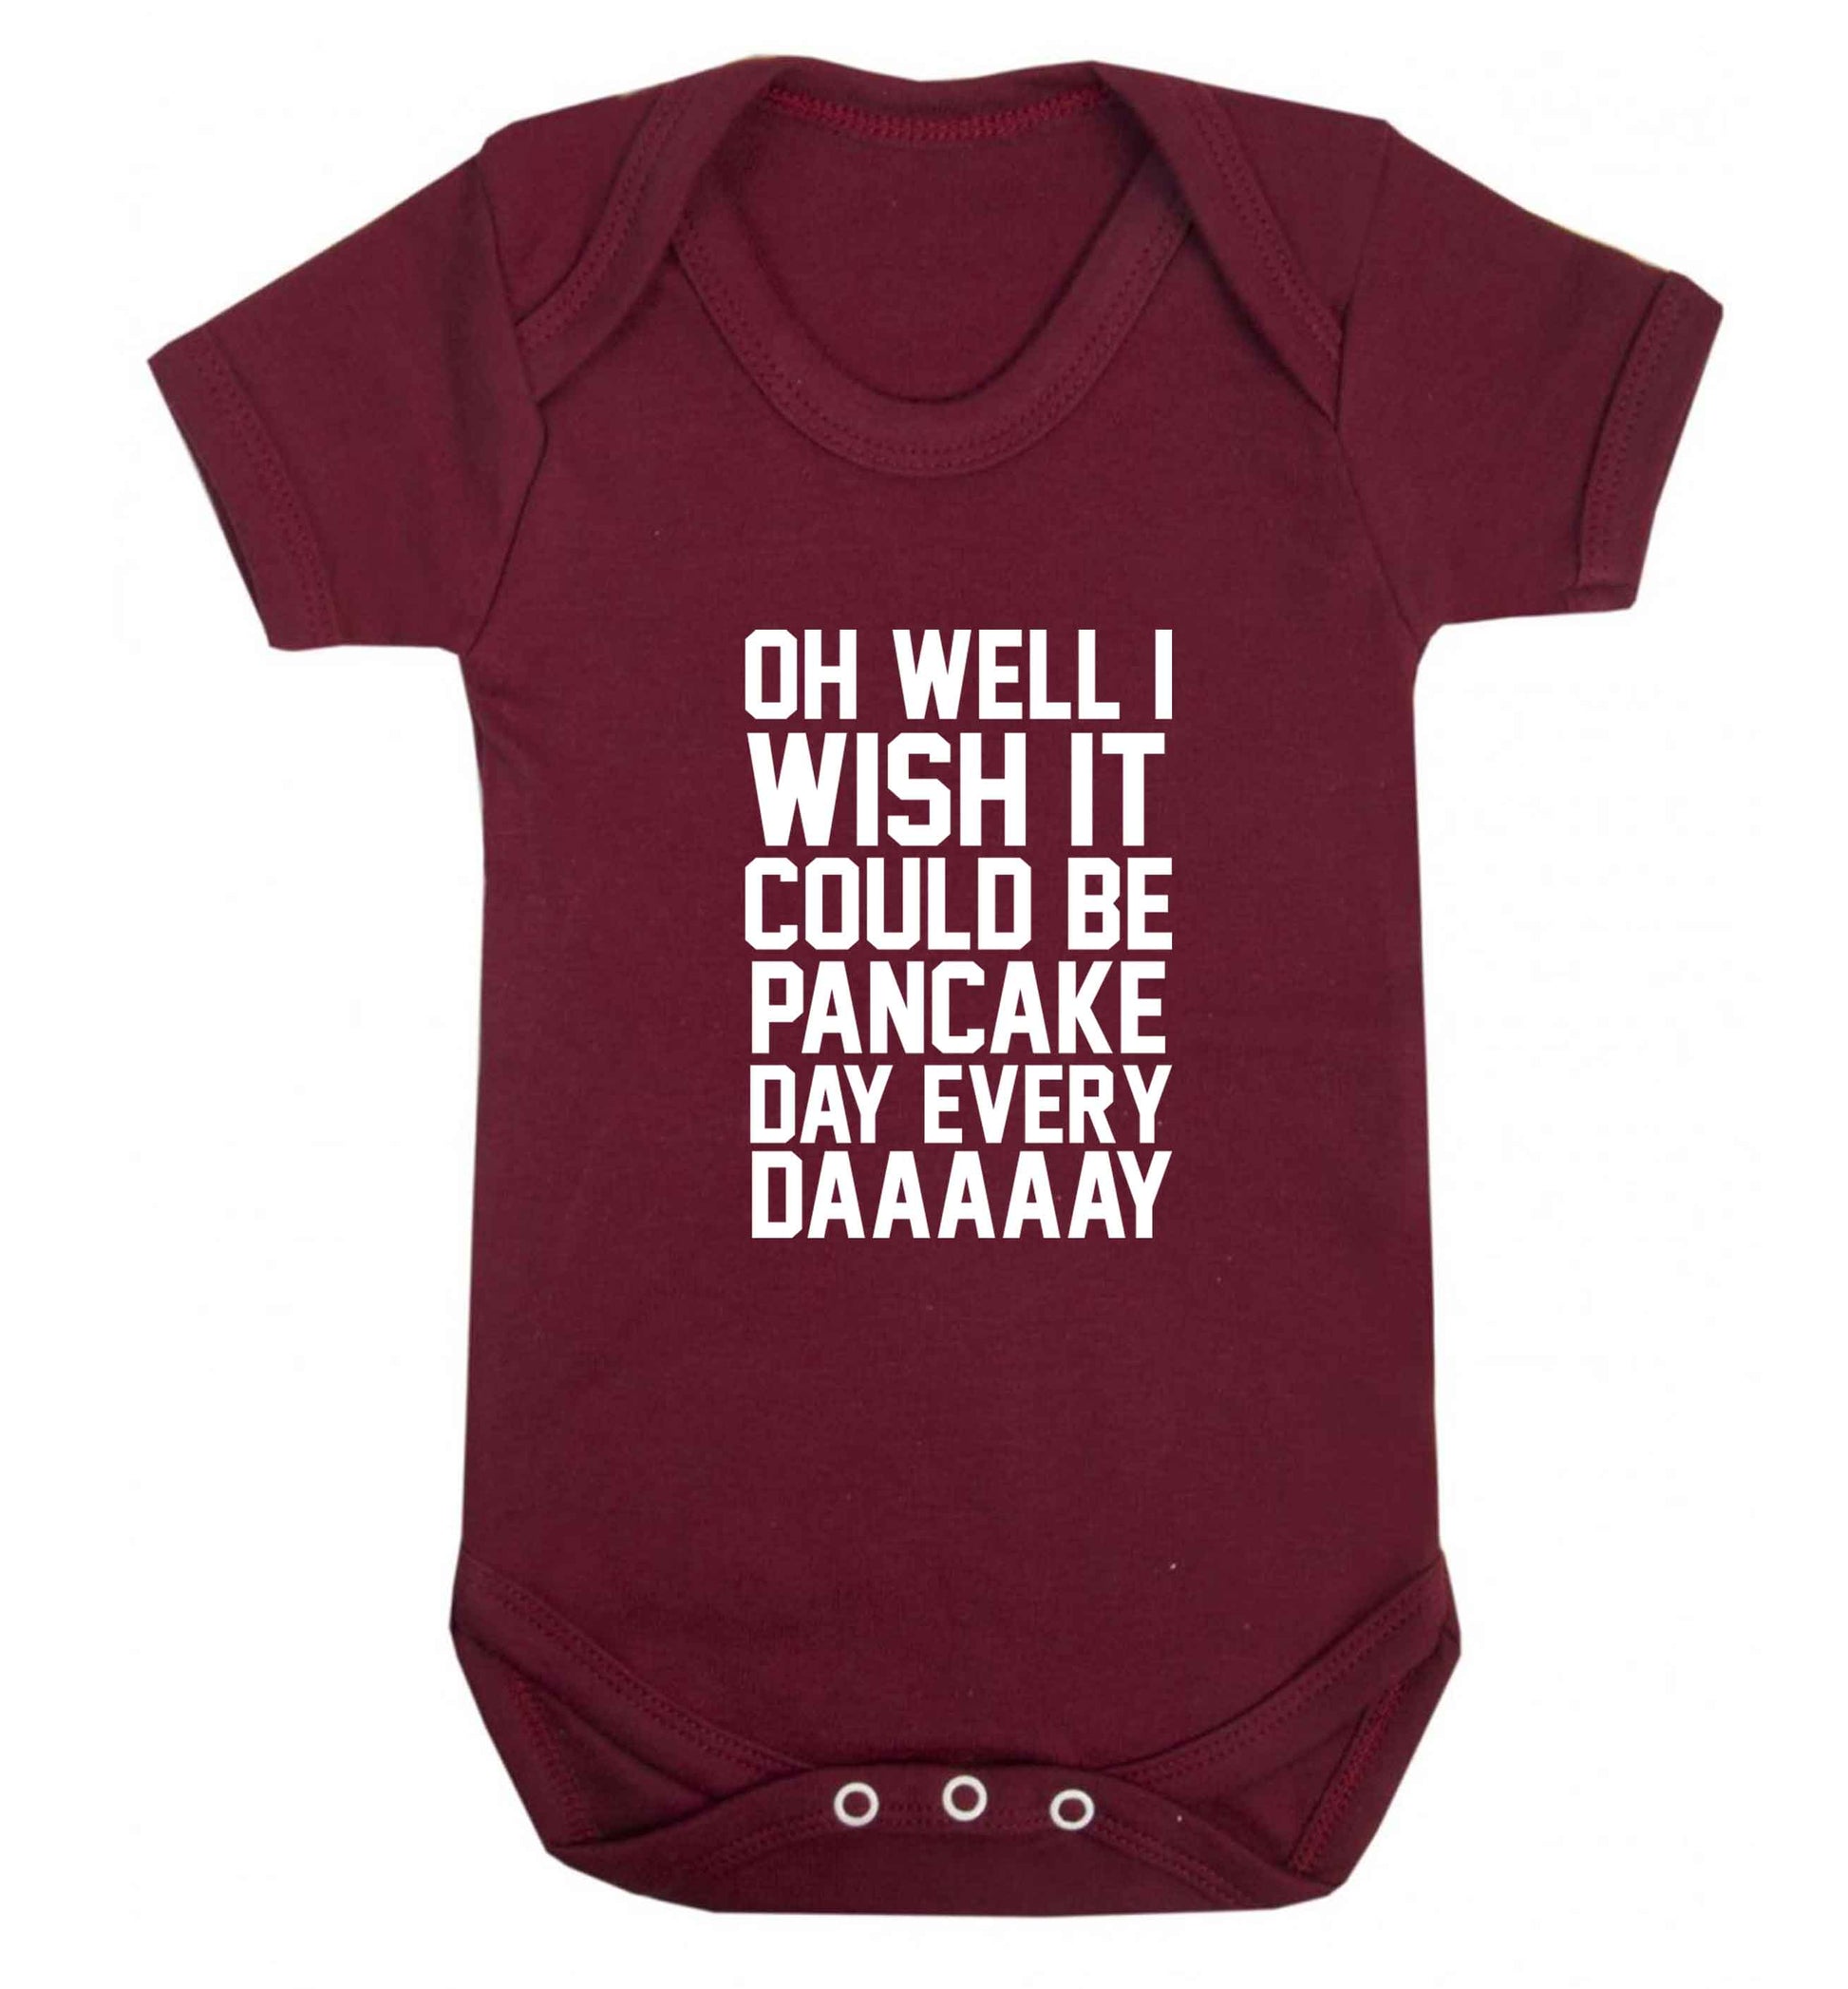 Oh well I wish it could be pancake day every day baby vest maroon 18-24 months